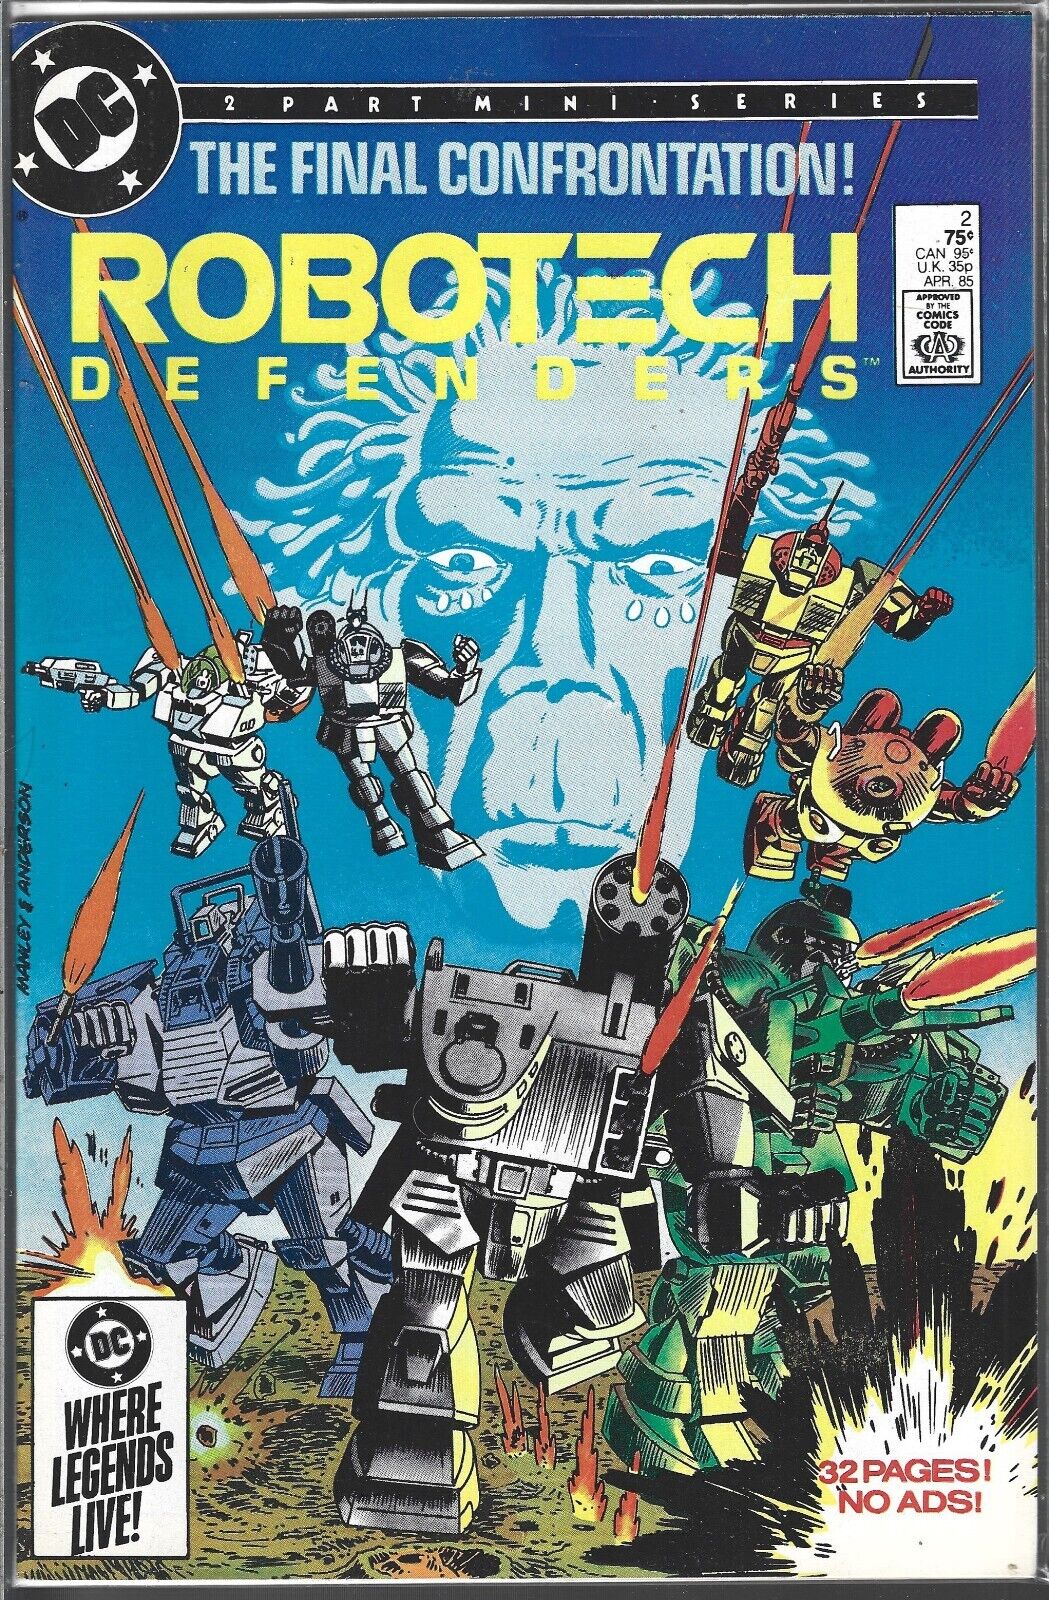 ROBOTECH DEFENDERS #2 OF 2 (VF/NM) COPPER AGE DC COMIC, $3.95 FLAT RATE SHIPPING